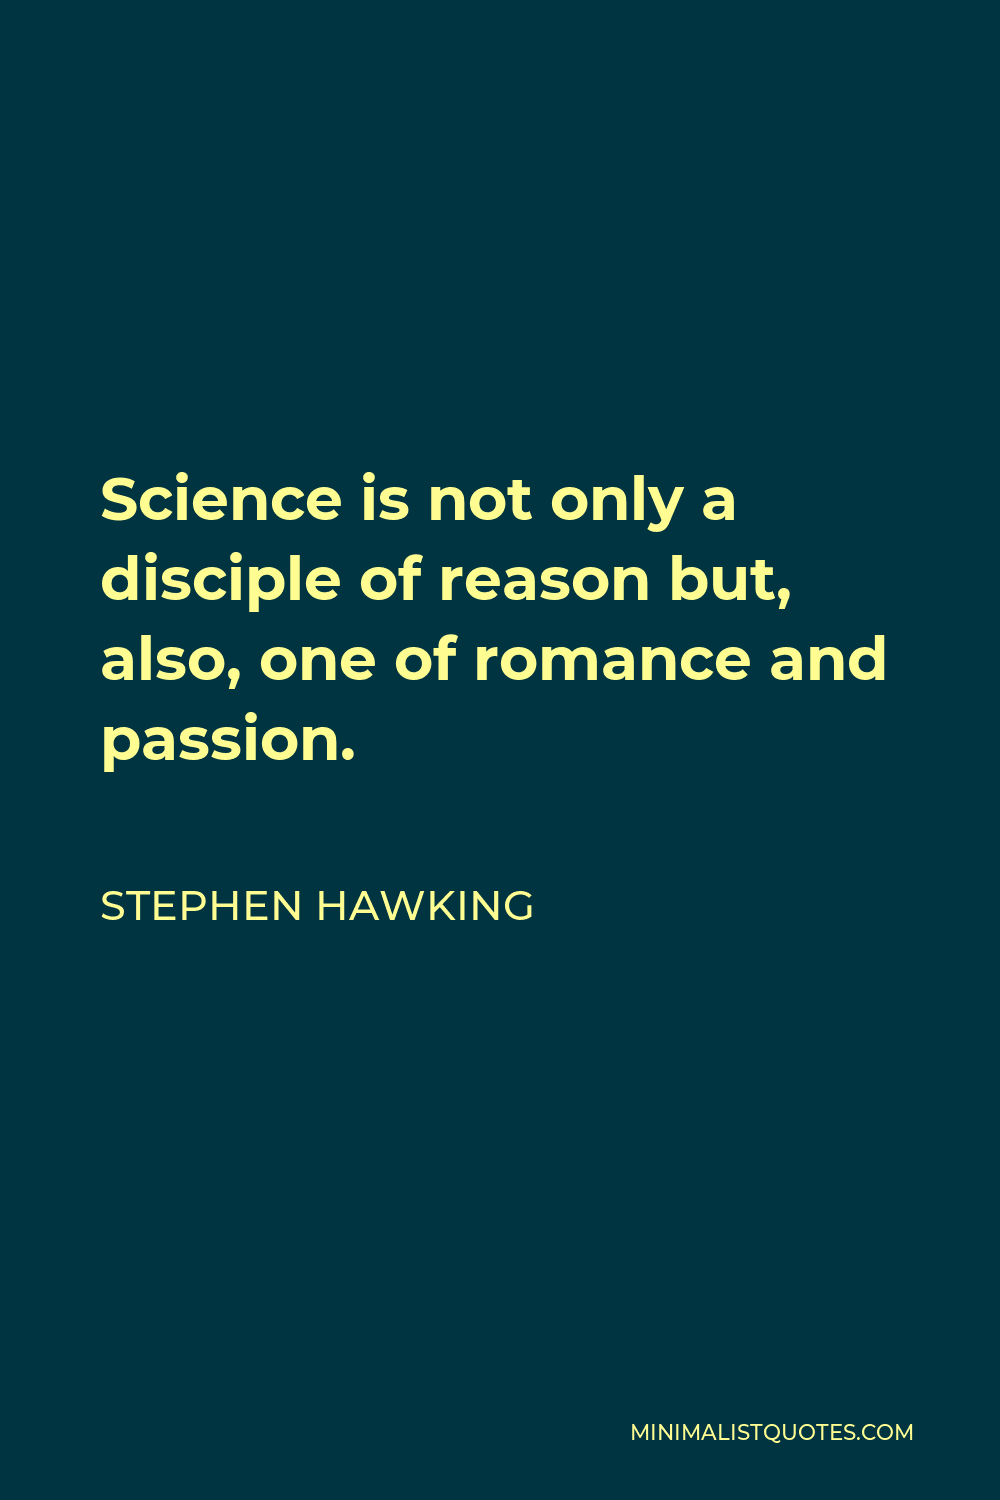 Stephen Hawking Quote: Science is not only a disciple of reason but ...